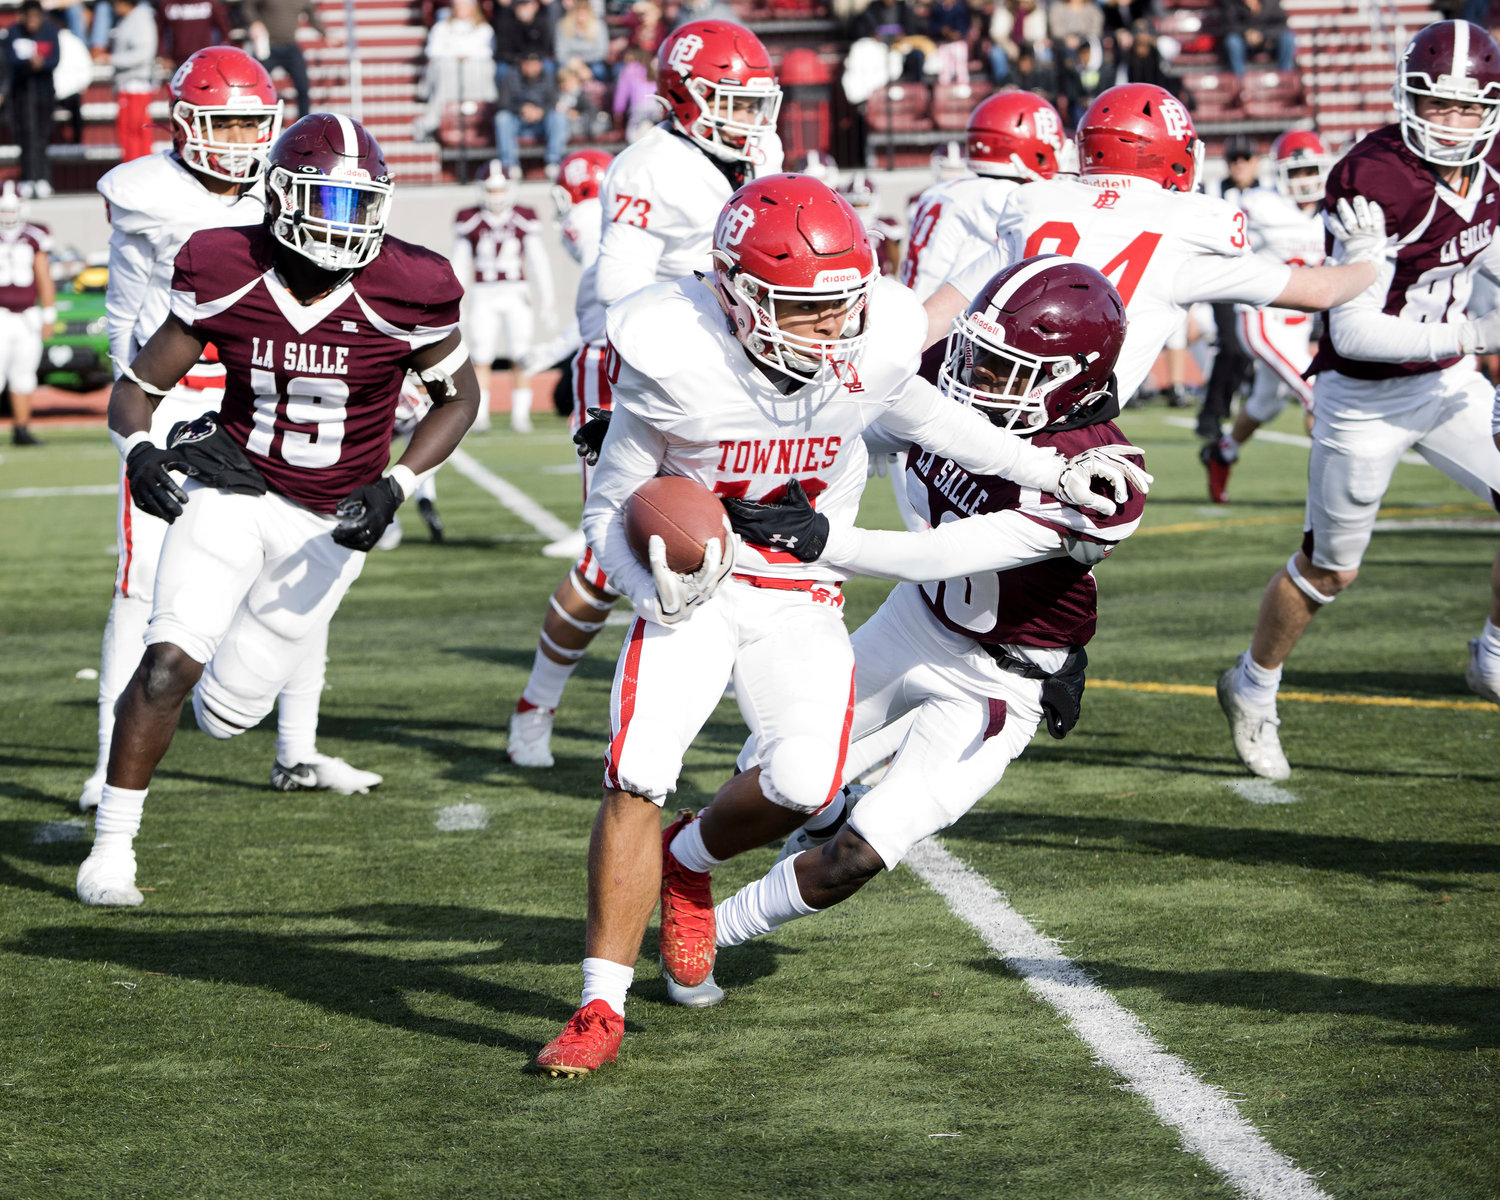 East Providence’s Denzy Suazo runs the ball for the Townies while competing against LaSalle in the annual Thanksgiving game.